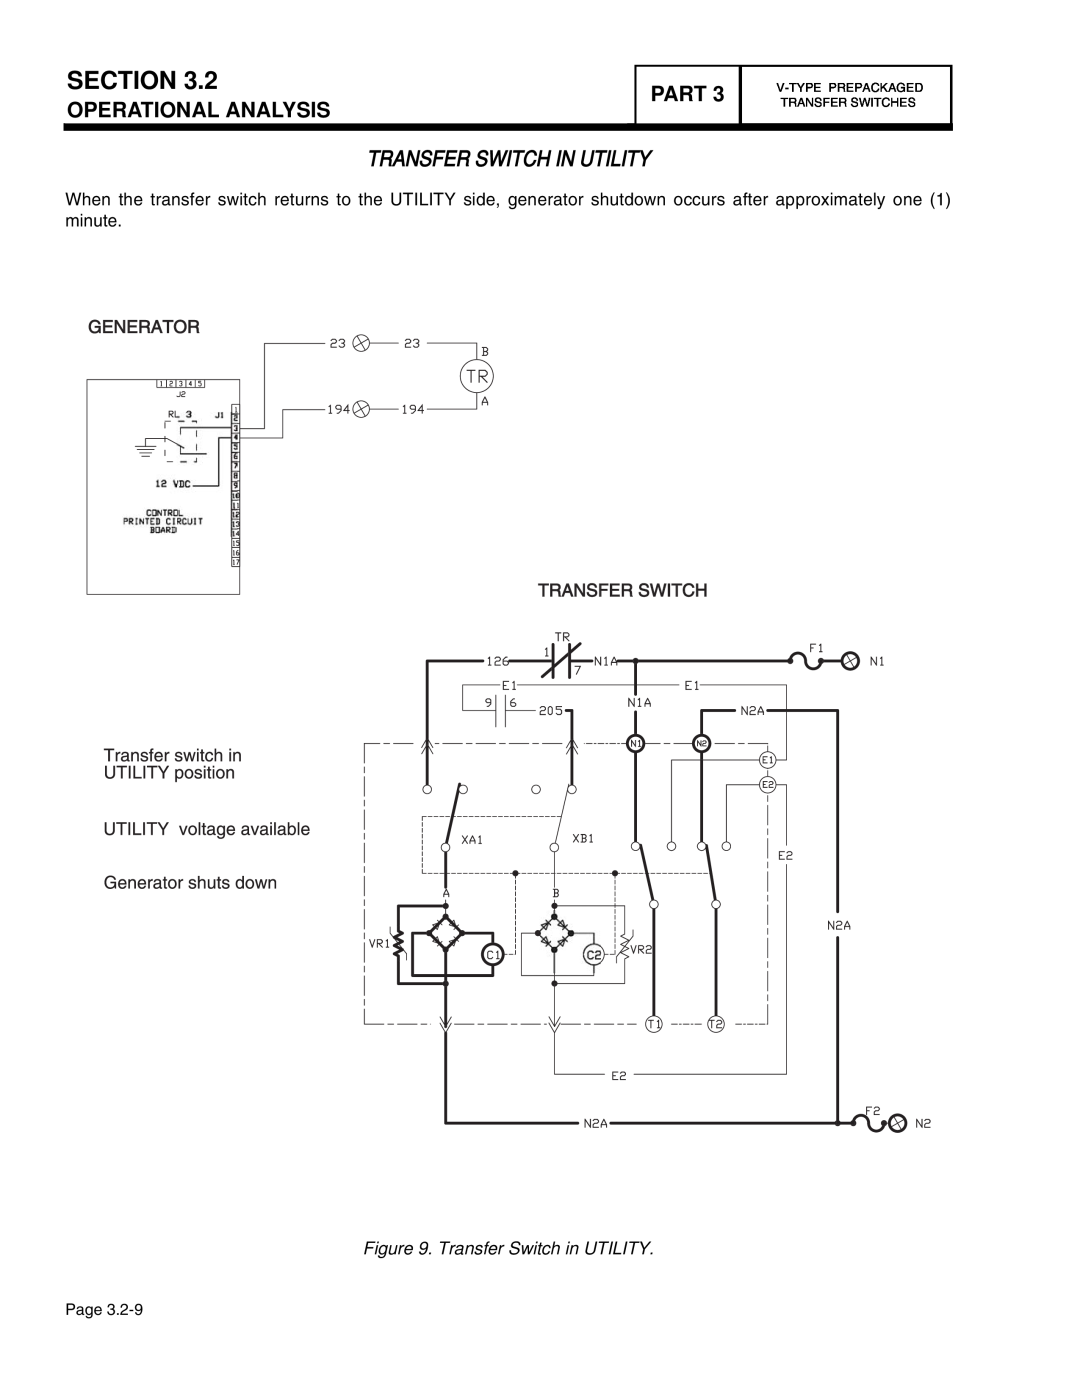 Guardian Technologies 4758 Transfer Switch In Utility, Section, Operational Analysis, Part, Transfer Switch in UTILITY 